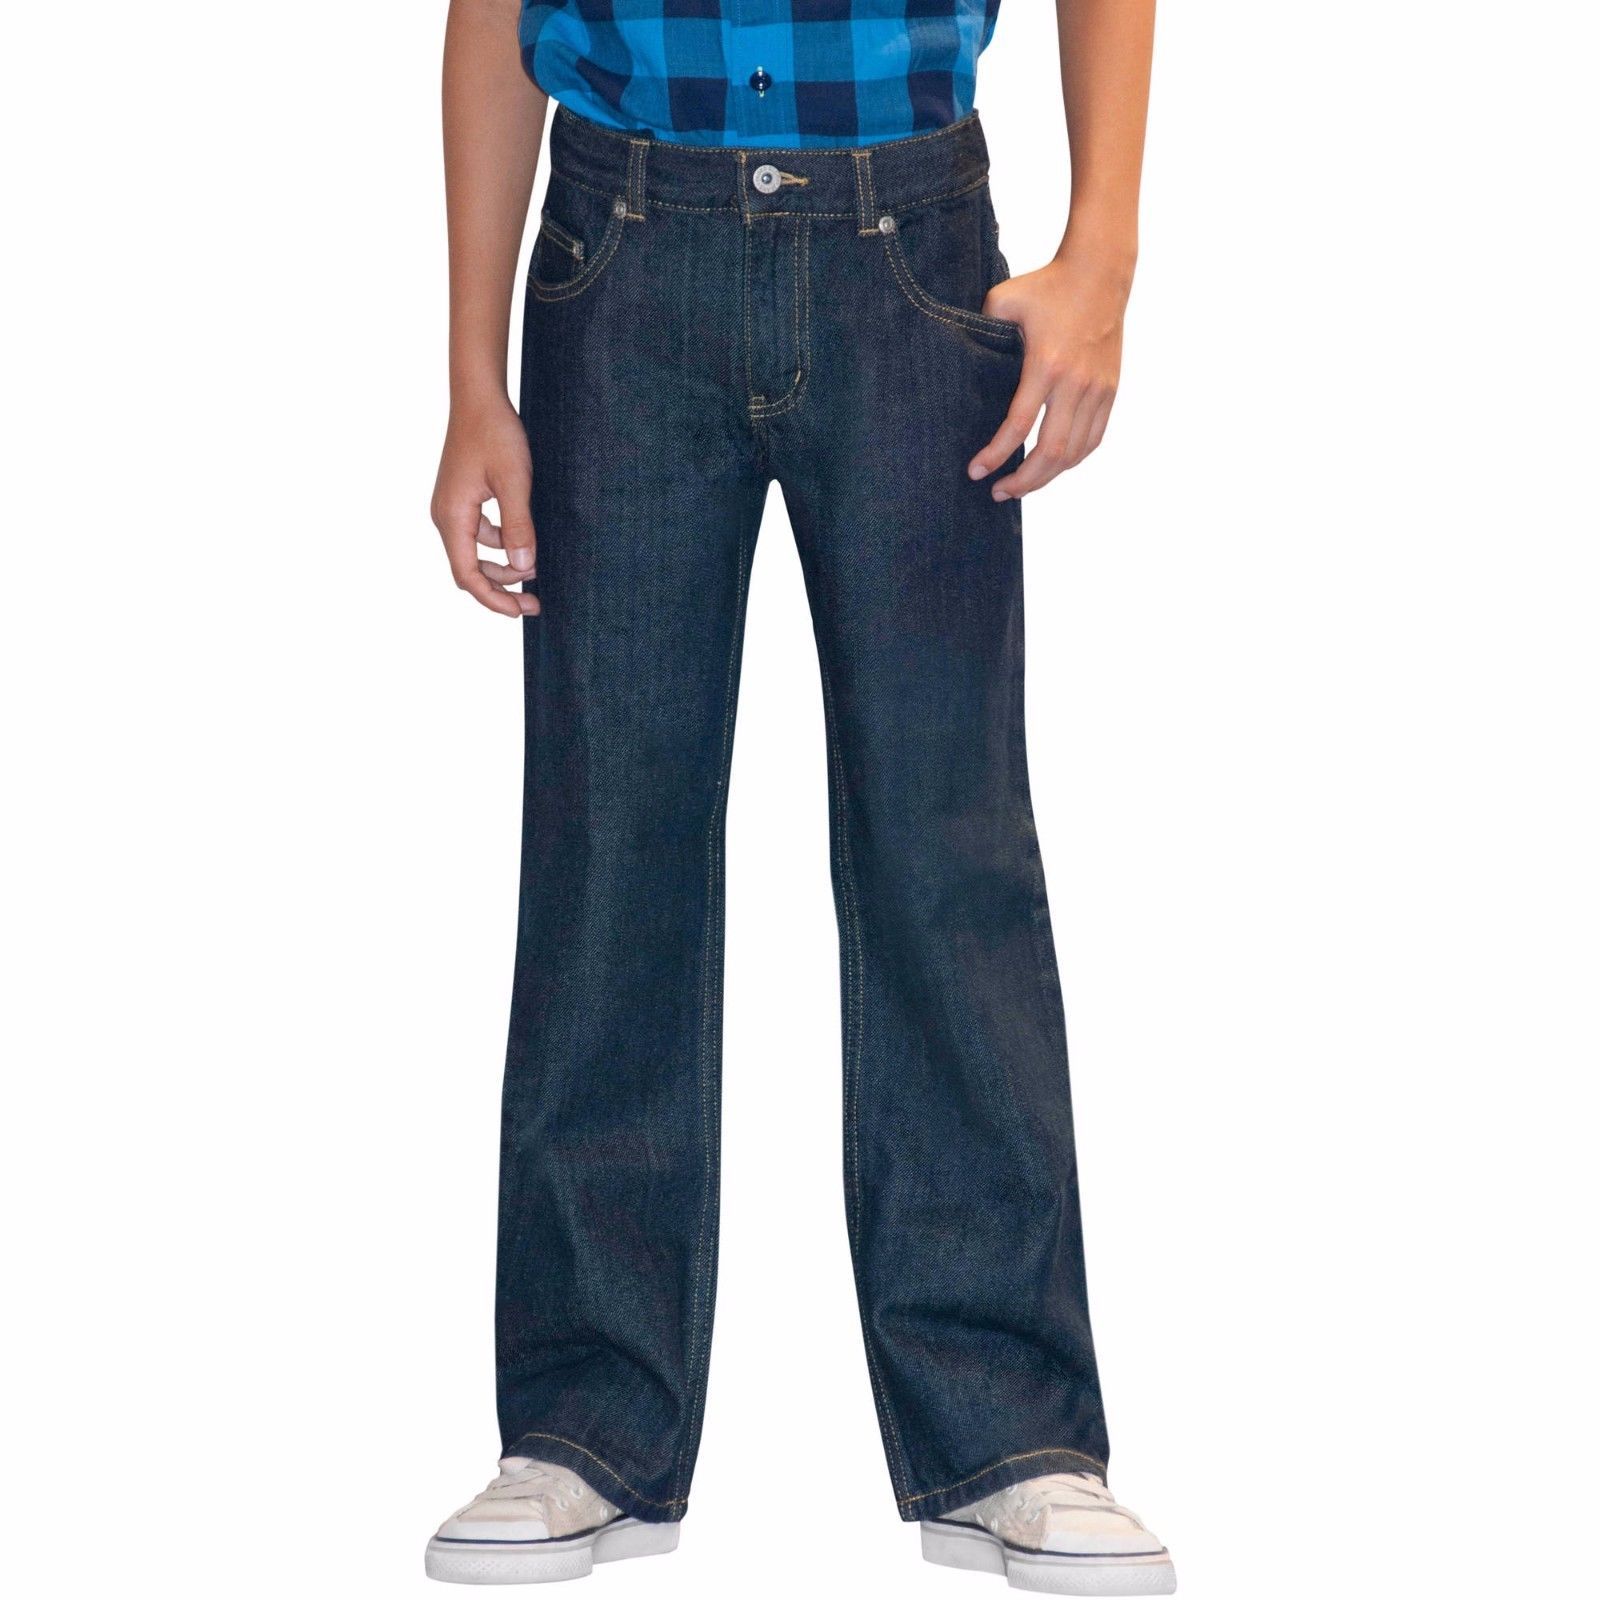 Faded Glory Boys Bootcut Jeans Rinse W Tint Size 12 HUSKY NEW - $18.80